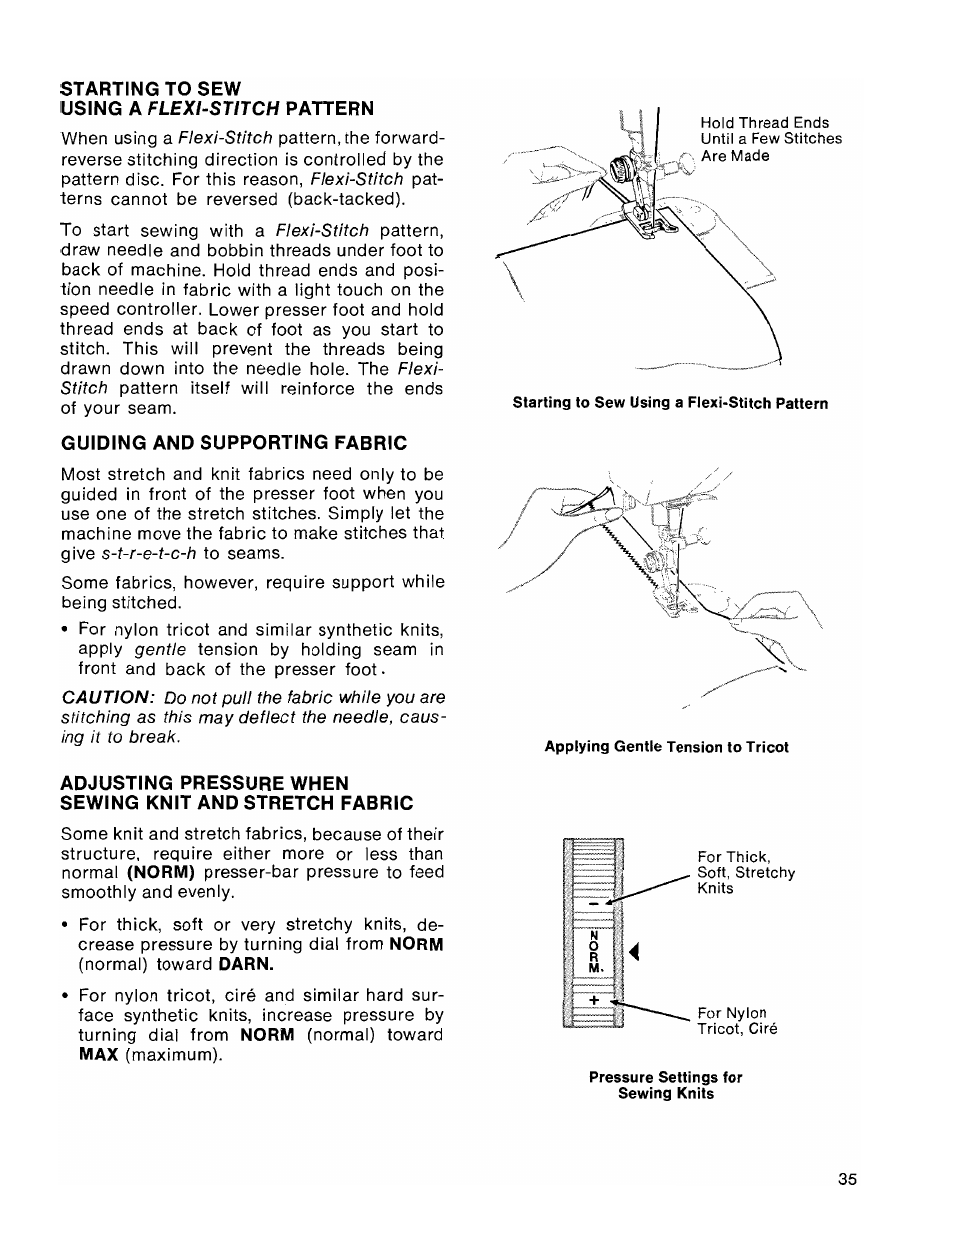 Starting to sew, Using a flexi-stitch pattern, Guiding and supporting fabric | SINGER 1036 Creative Touch User Manual | Page 40 / 66